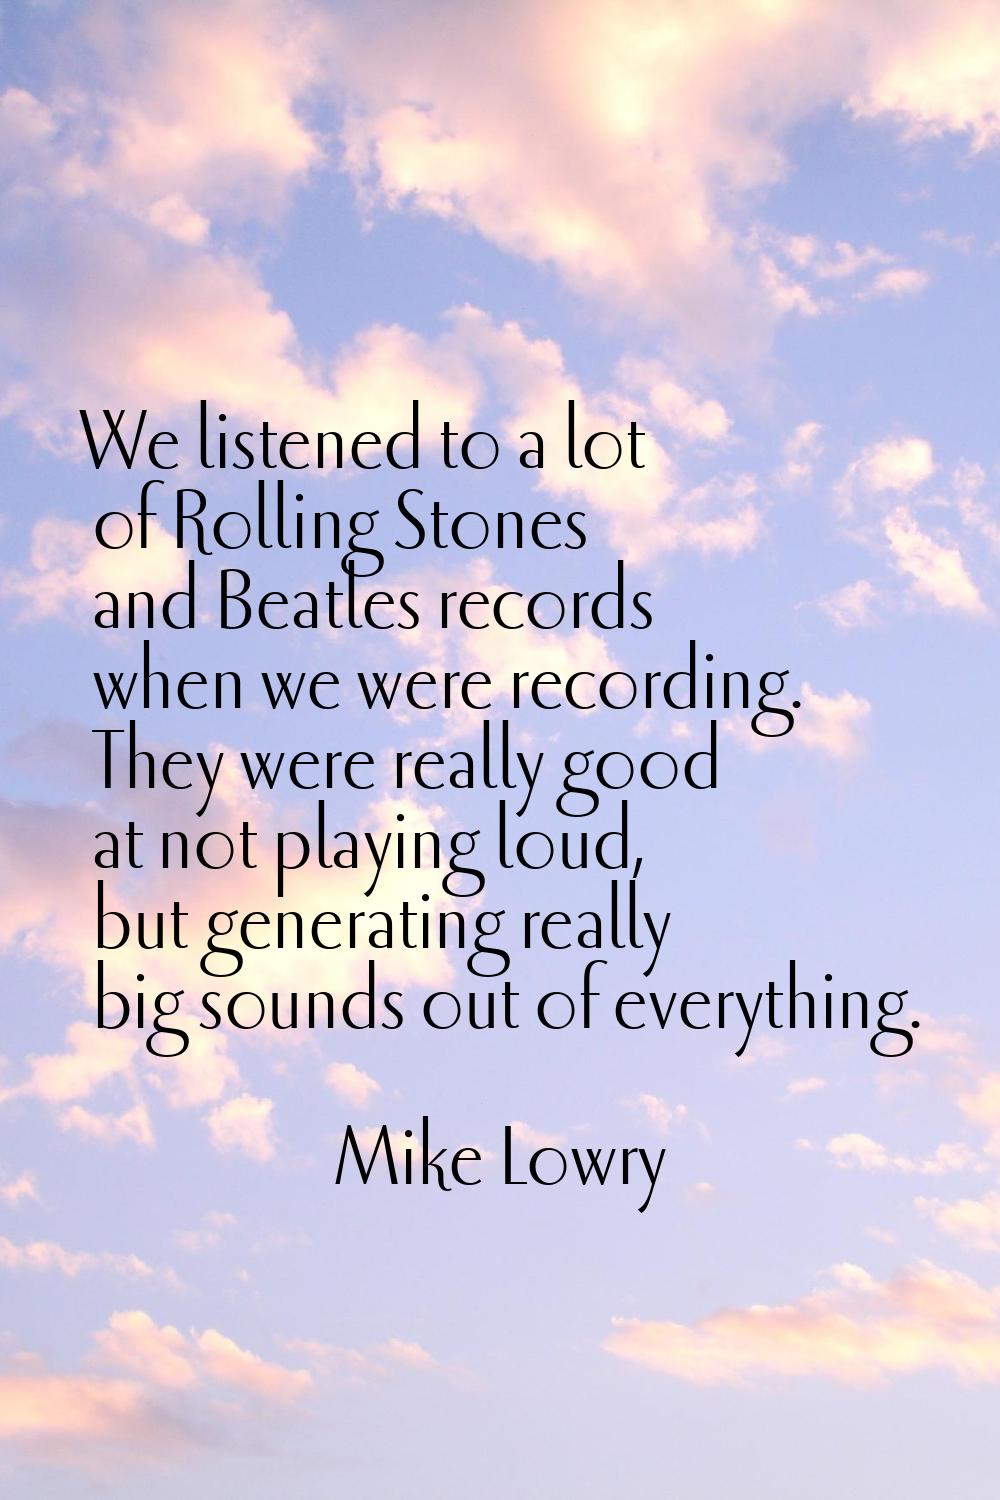 We listened to a lot of Rolling Stones and Beatles records when we were recording. They were really